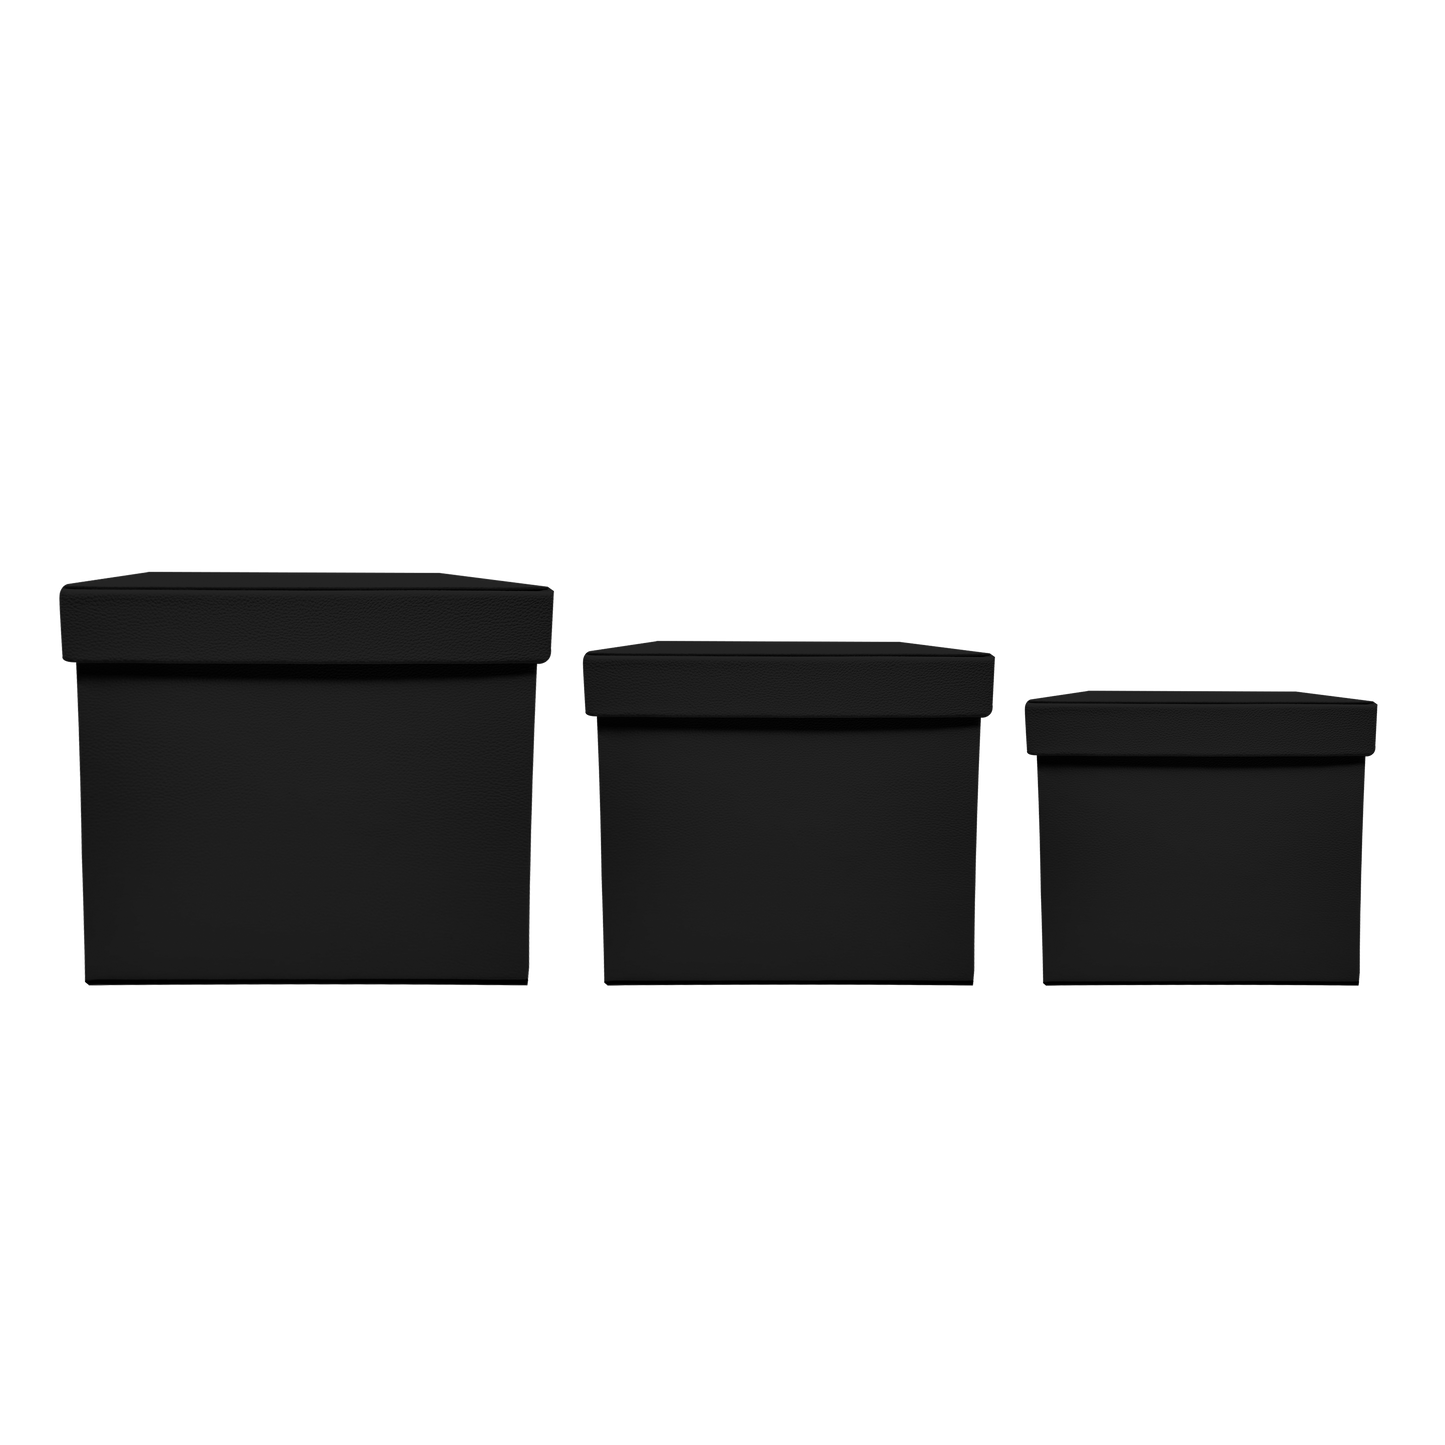 Kit 3 different sizes square boxes 3 in 1 - OP-B - PU Leather Black